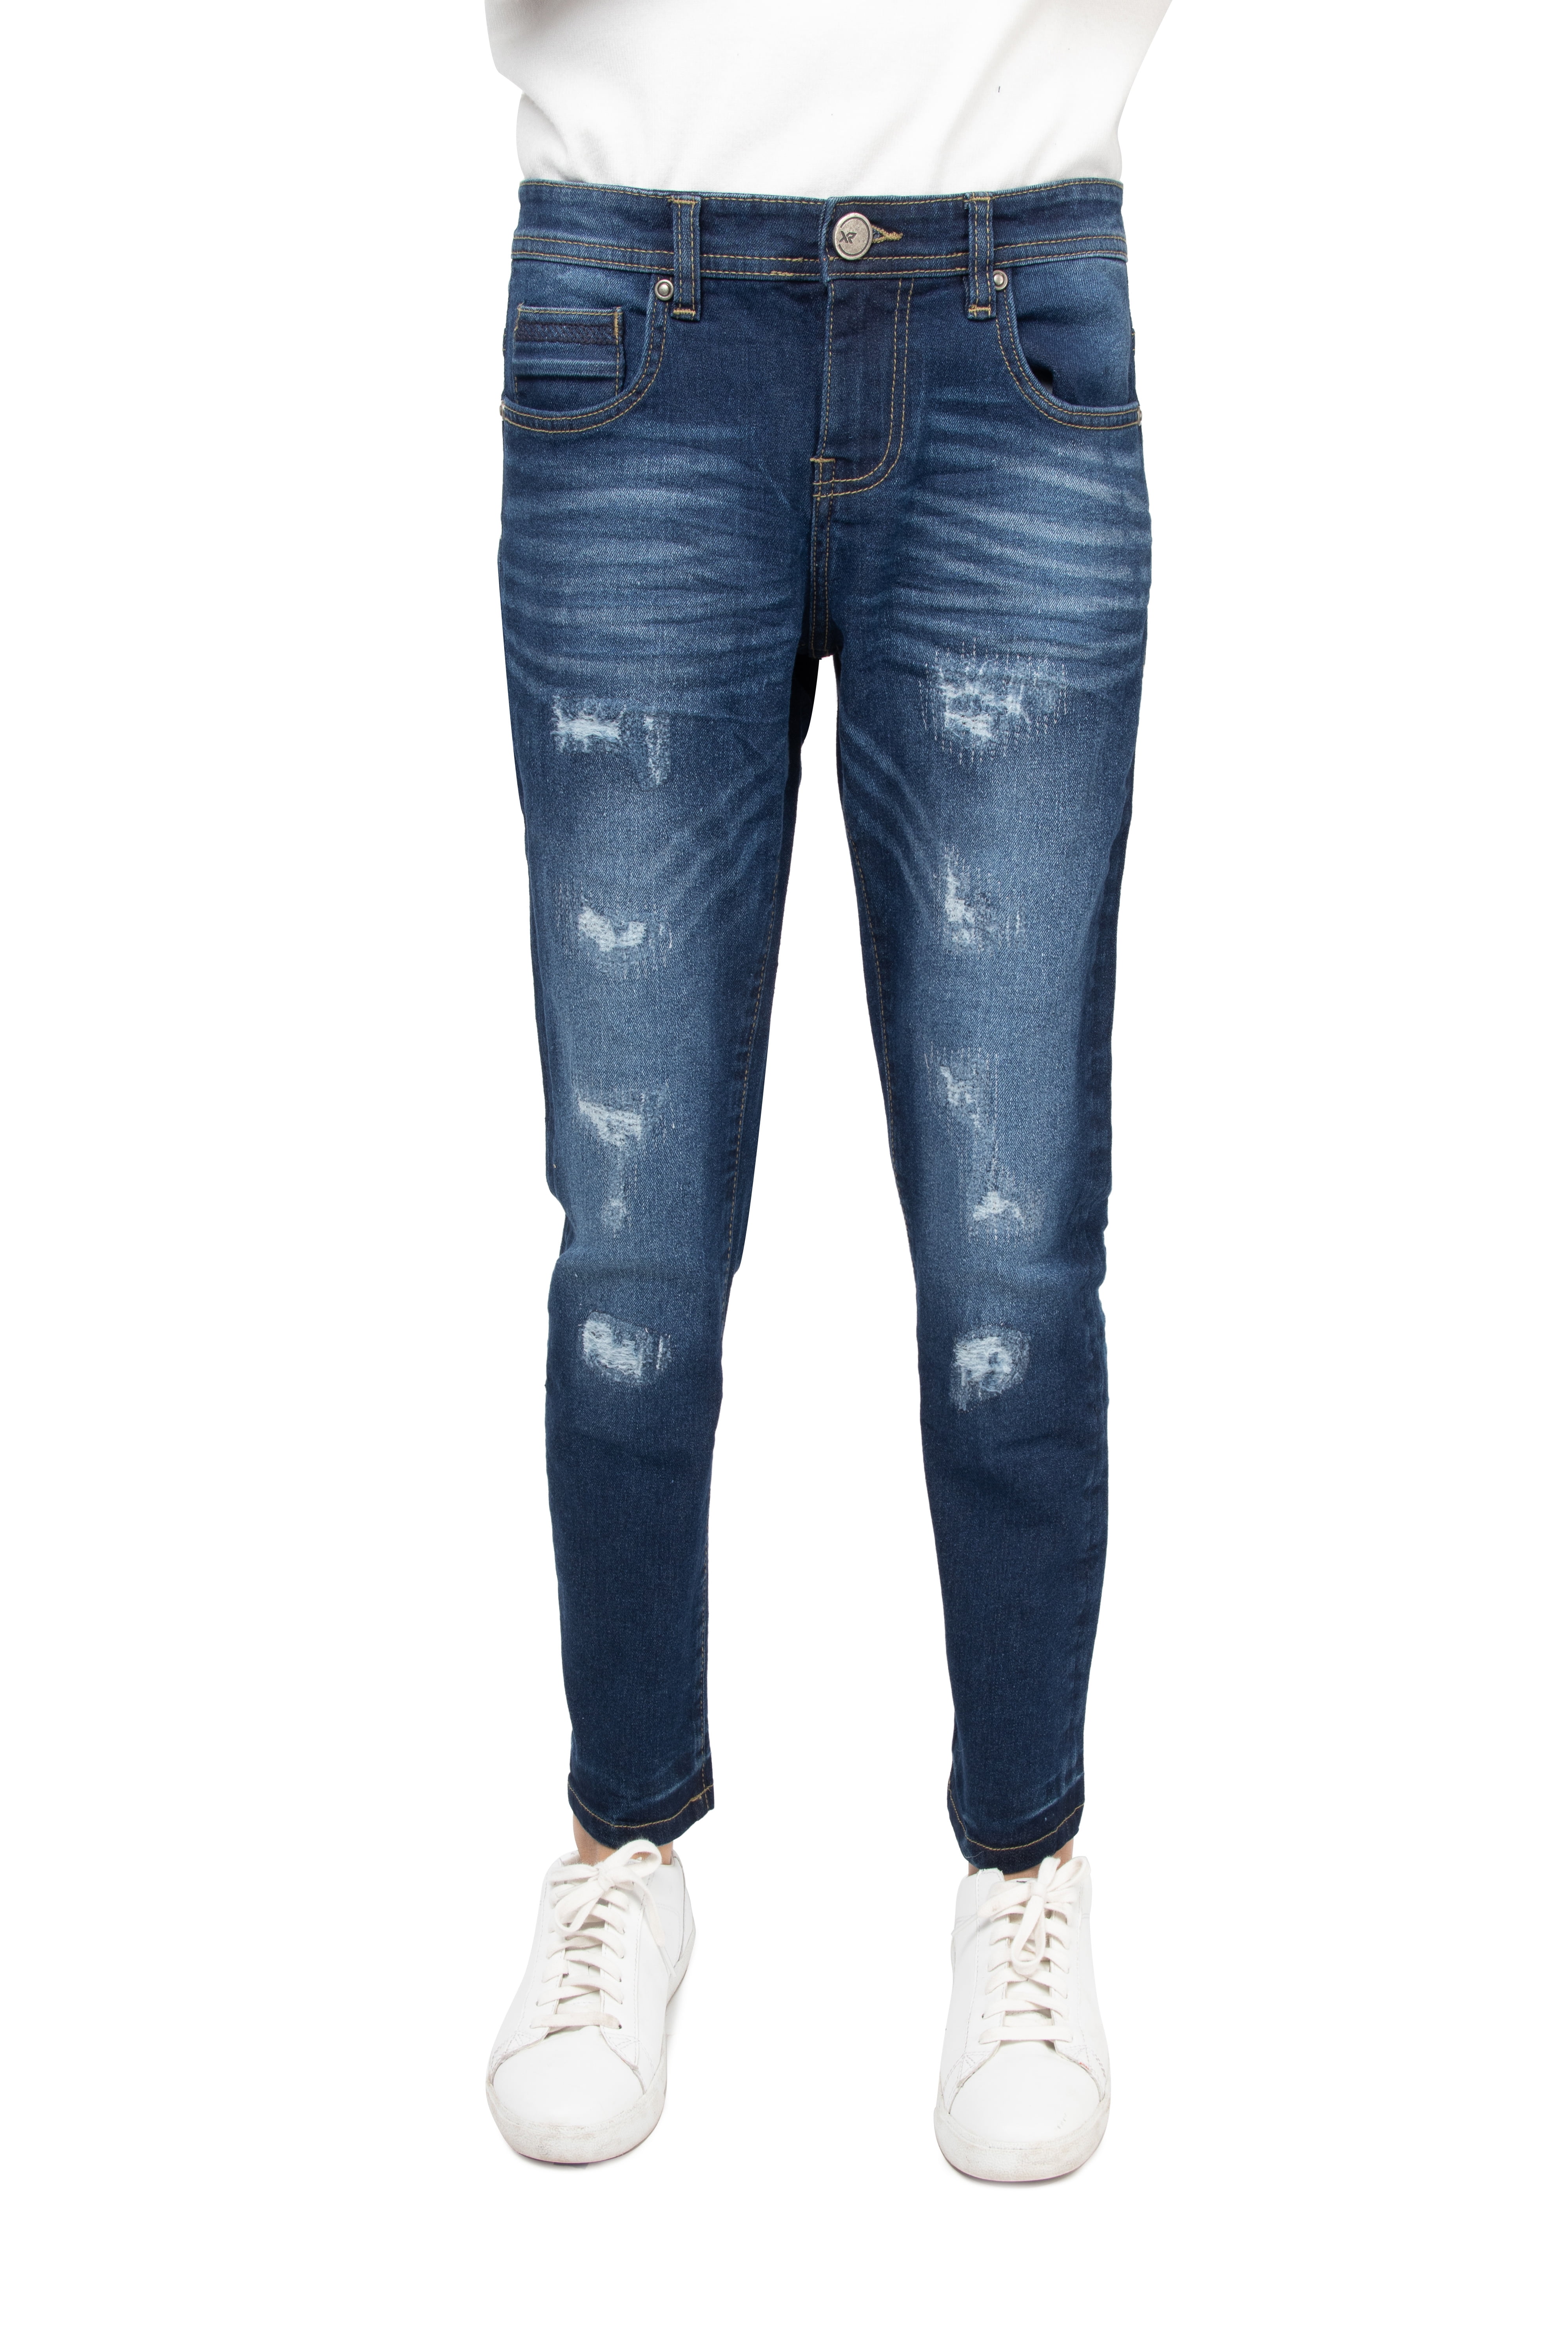 Cotton Jeans & Trousers Boys Night Pant 12 to 14 years., Size: 28.0